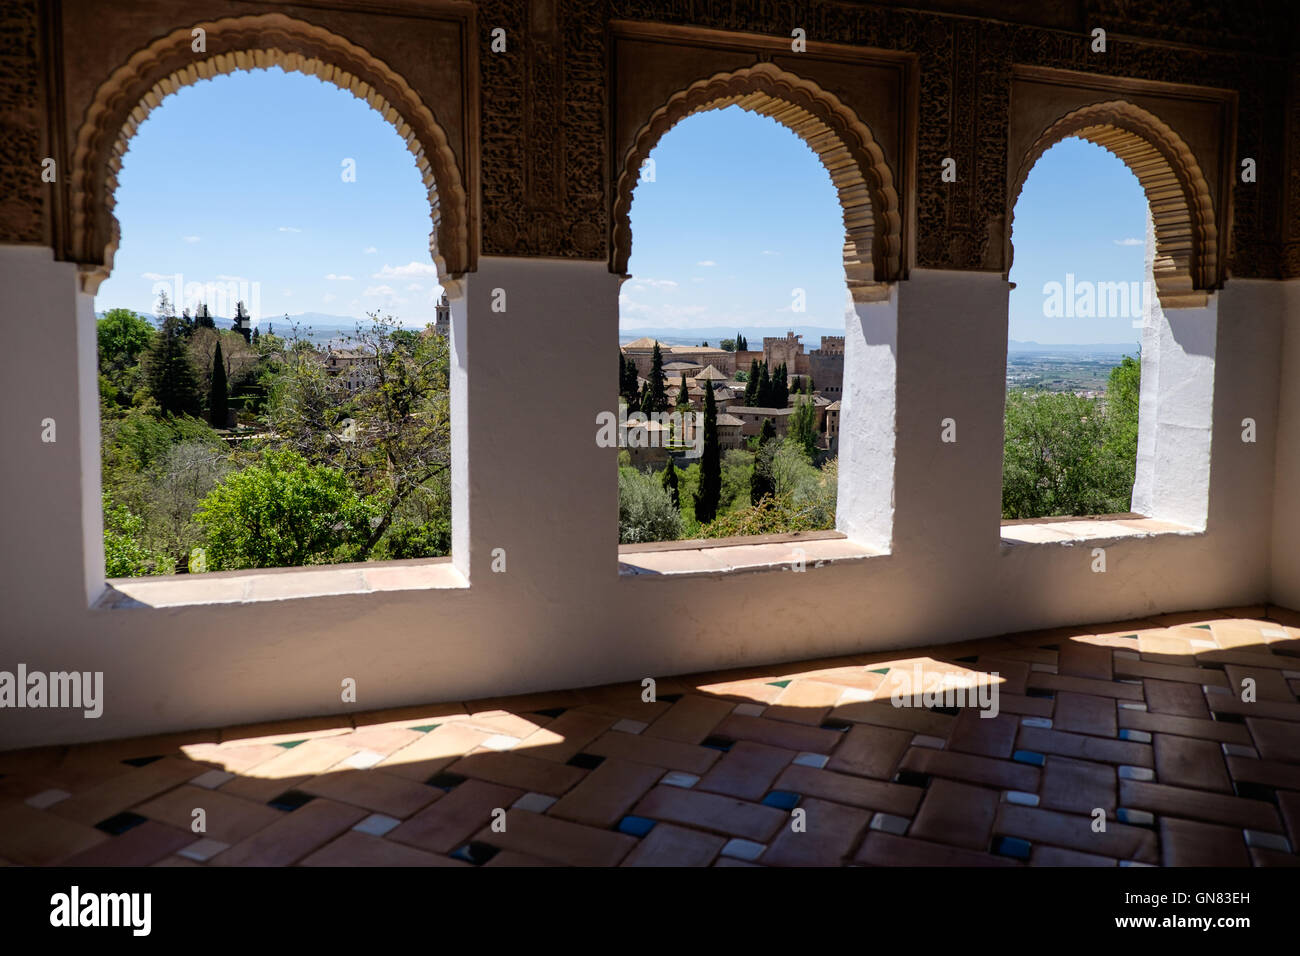 The Alhambra Palace, Granada, Andalucia, seen through arches in the Generalife gardens Stock Photo